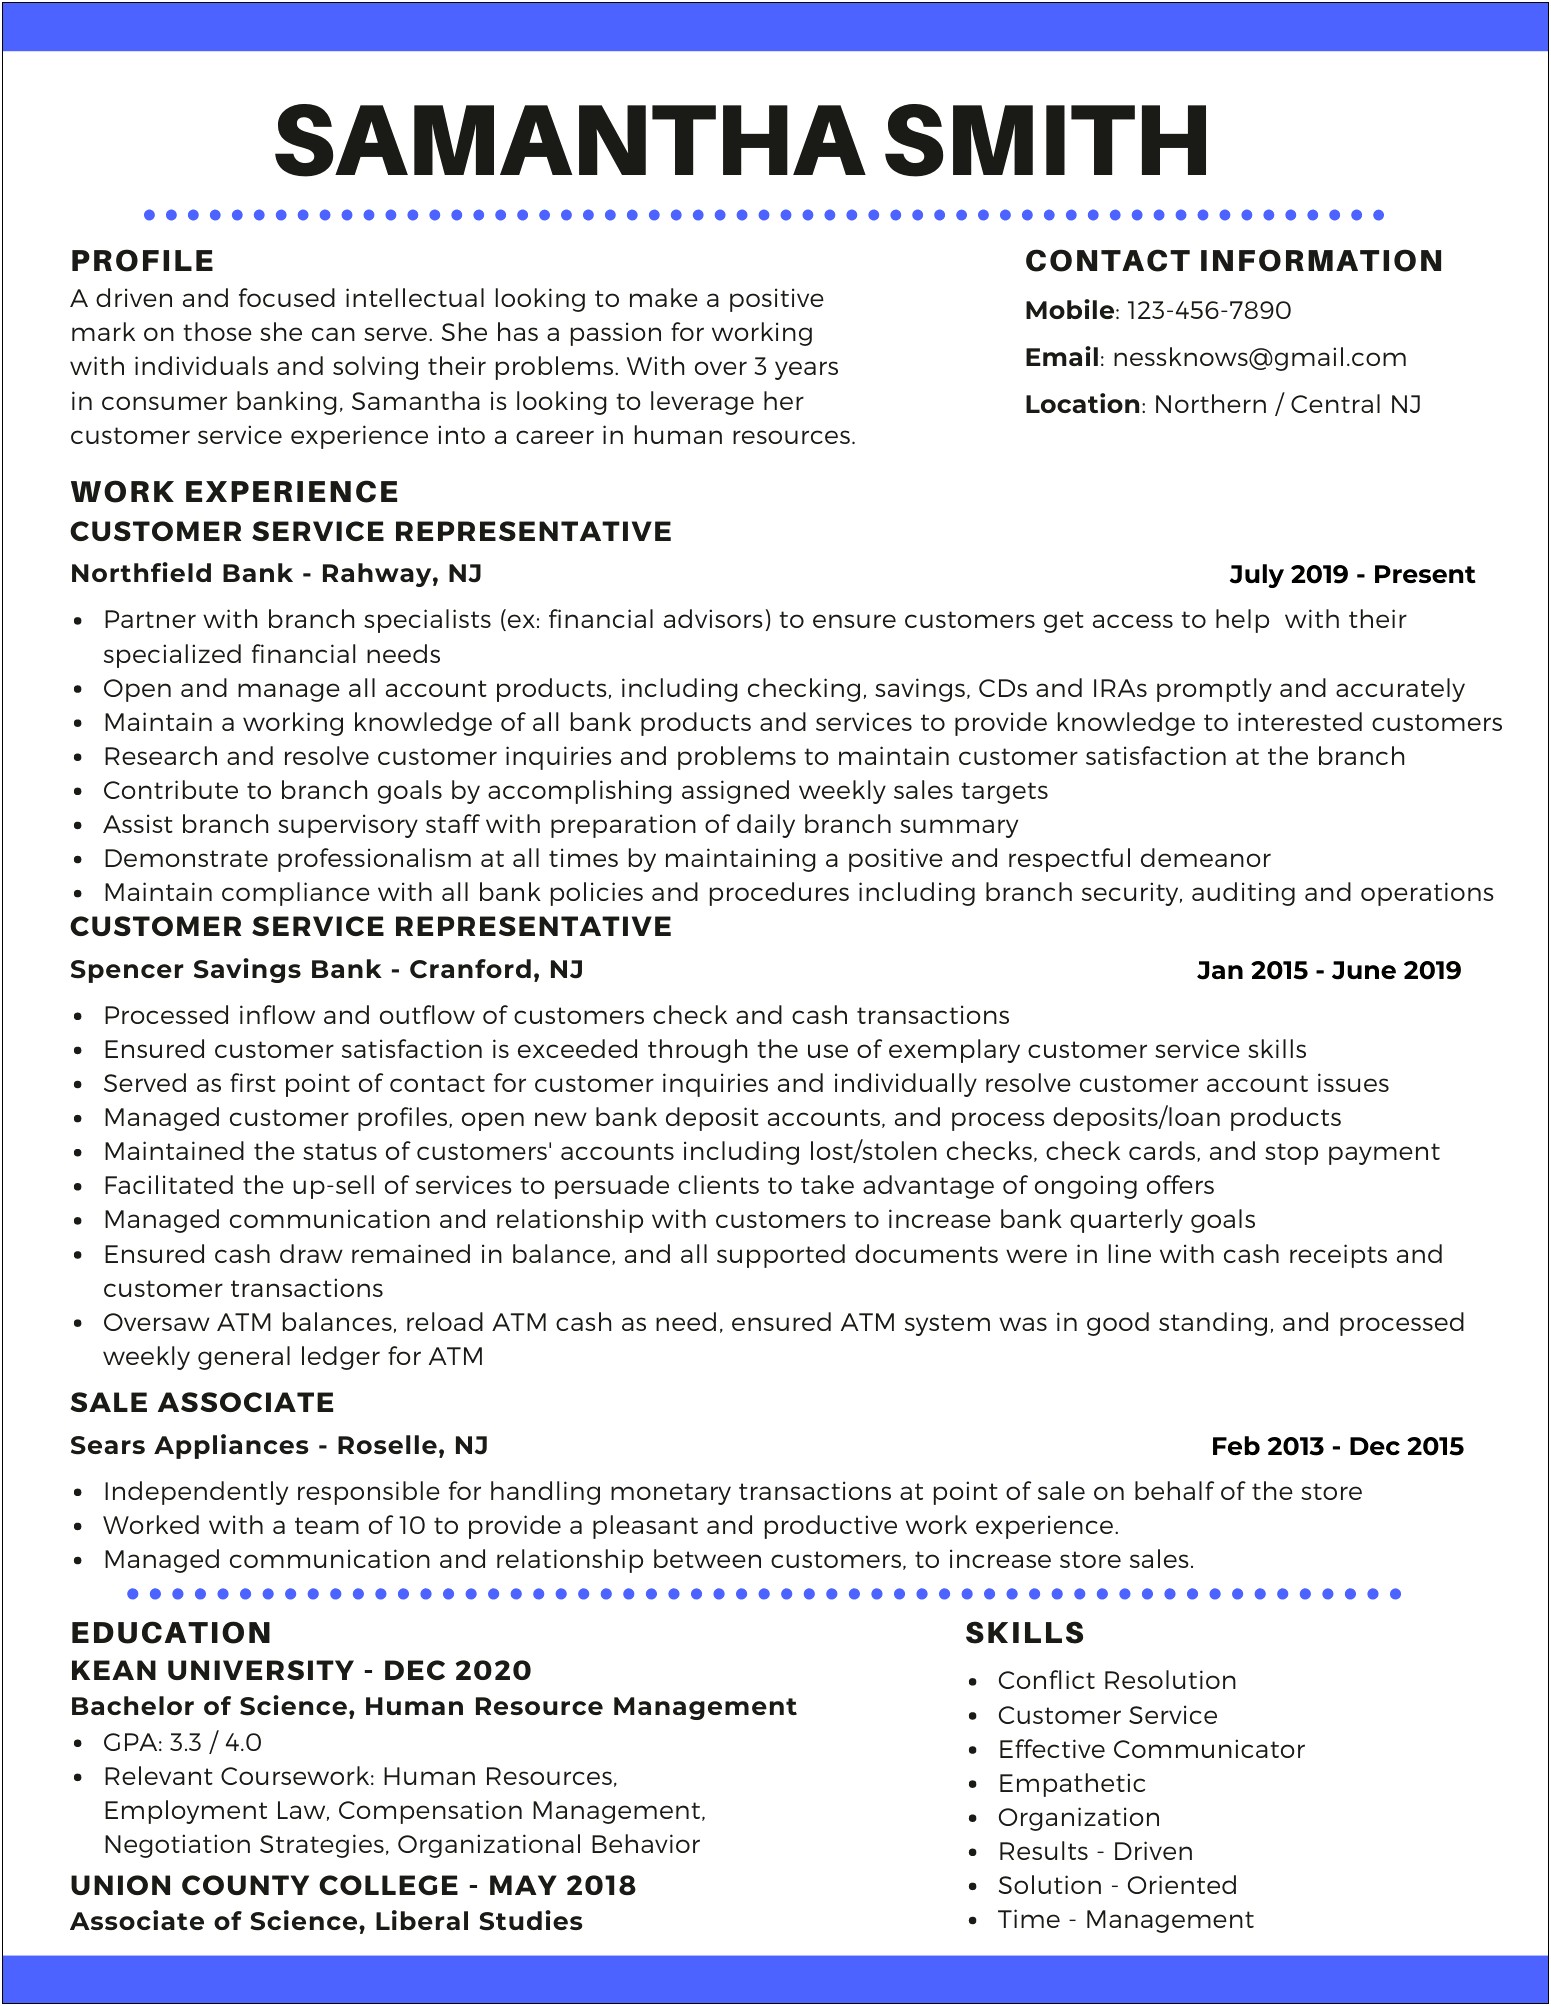 Resume With Relevant Coursework Example